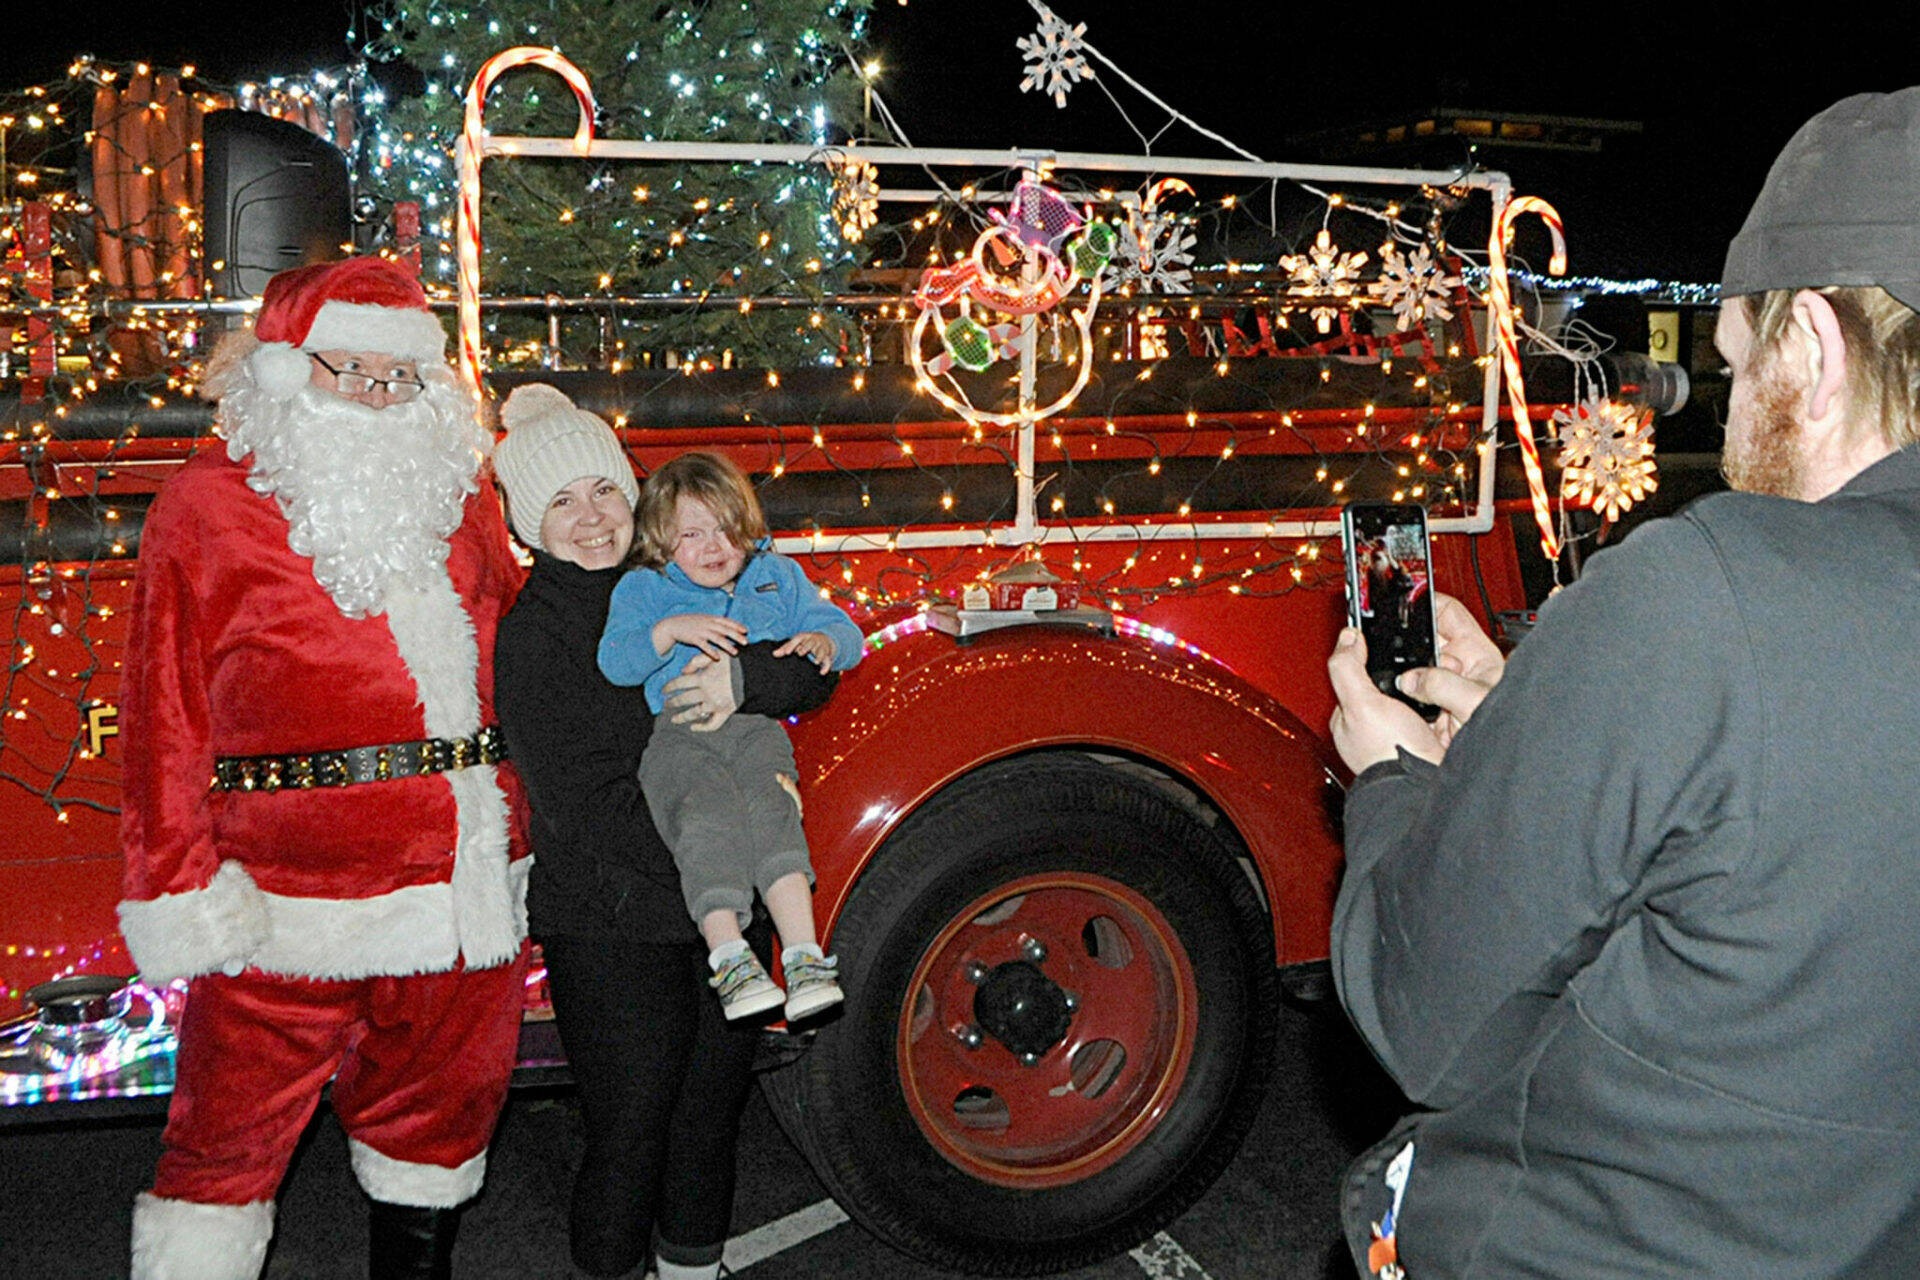 Sequim Gazette file photo by Matthew Nash
Veronica Weatherly holds her son Tucker for a photo-op with Santa Claus in 2021 as her husband Doug takes a photo. Santa’s Toy and Food Fire Brigade tours Sequim again Dec. 4-7.